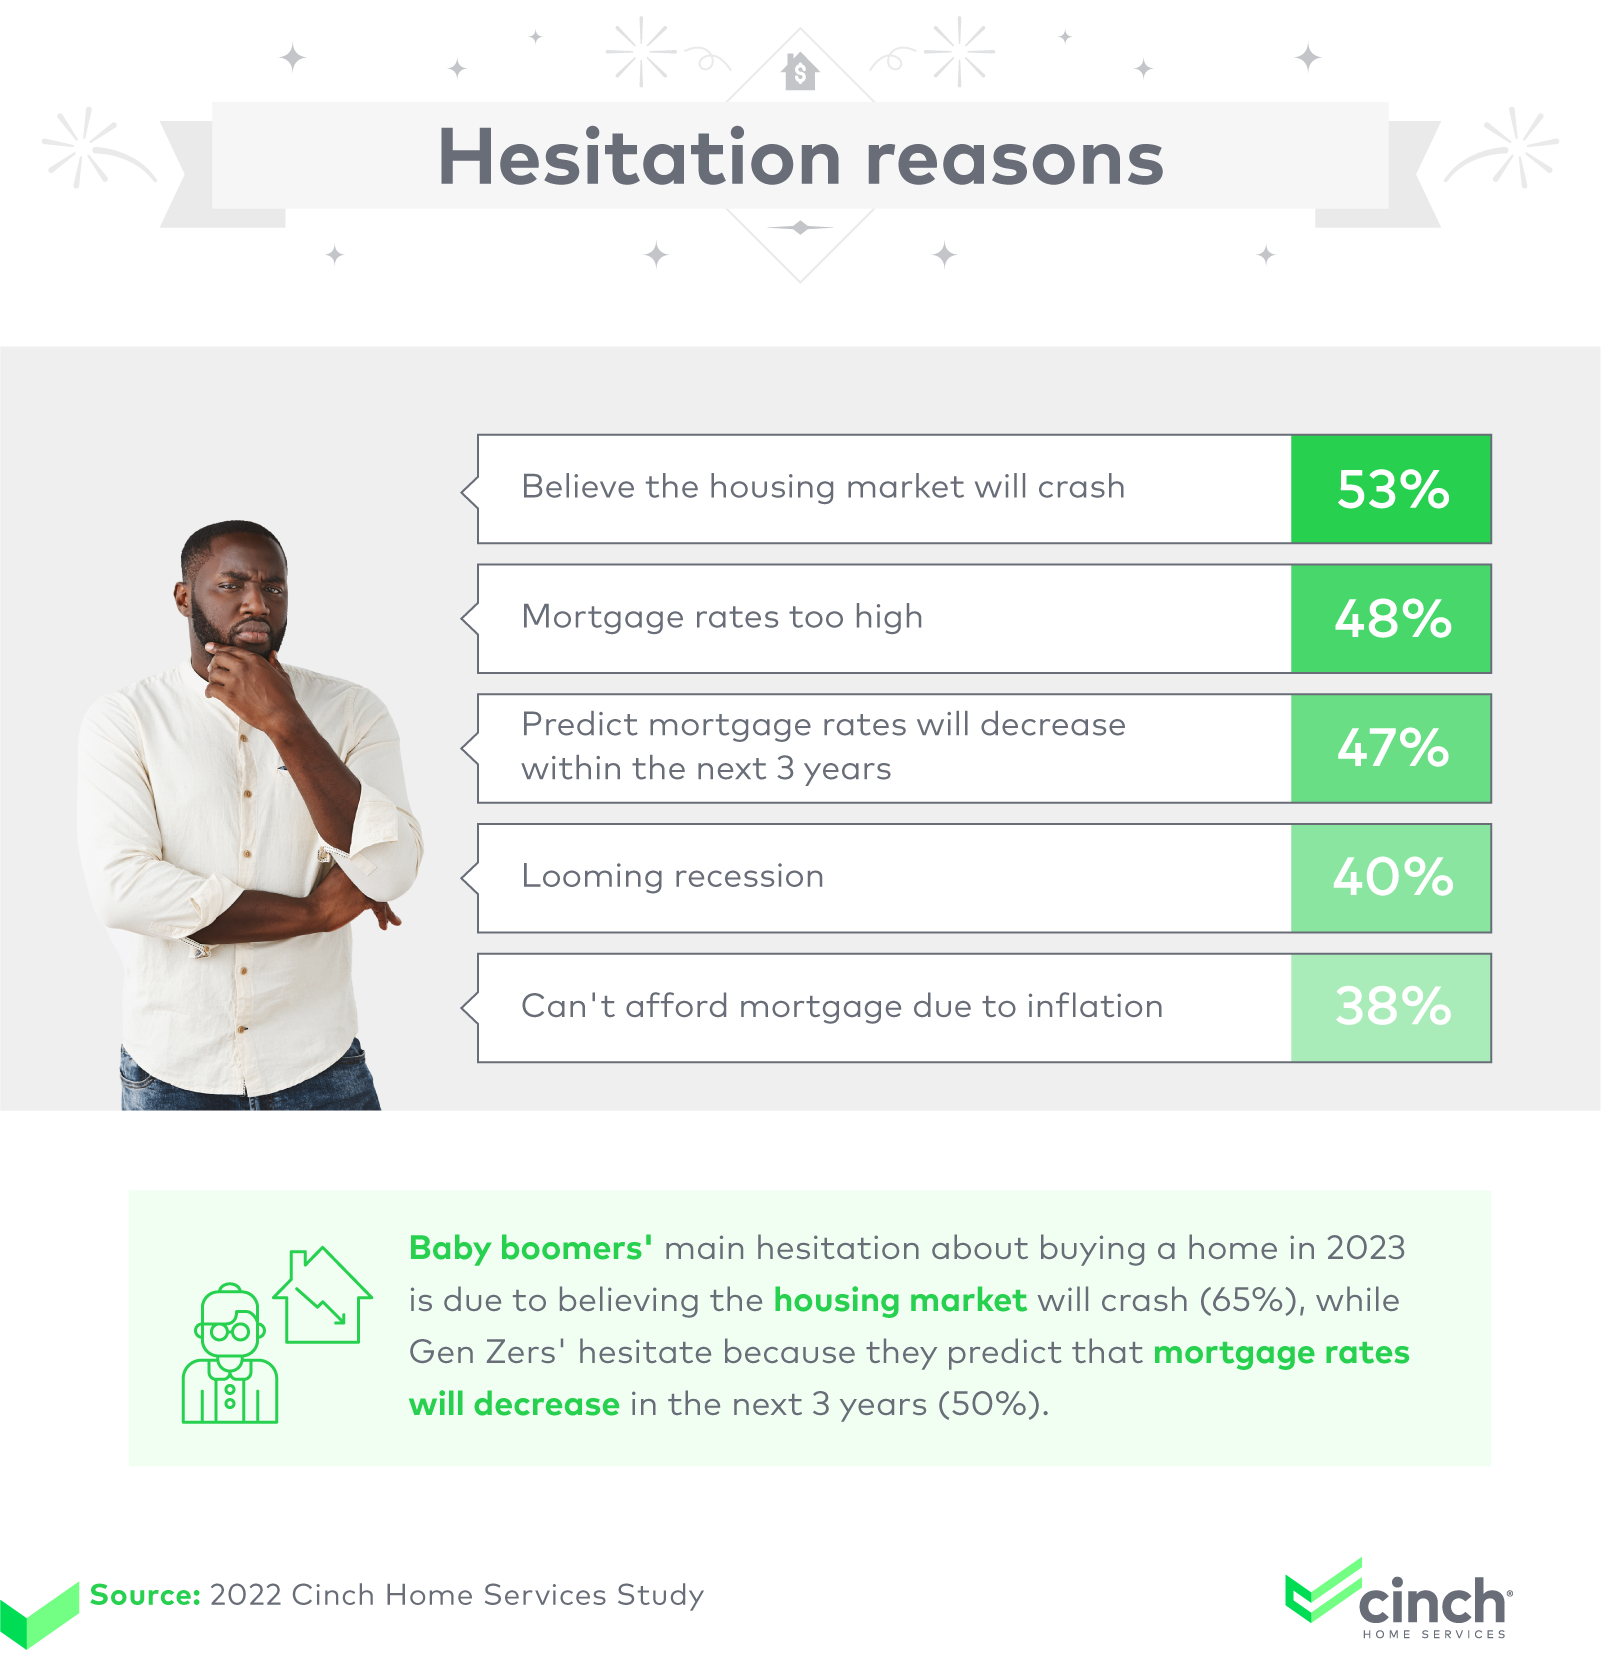 Hesitation reasons for not purchasing a home in 2023.